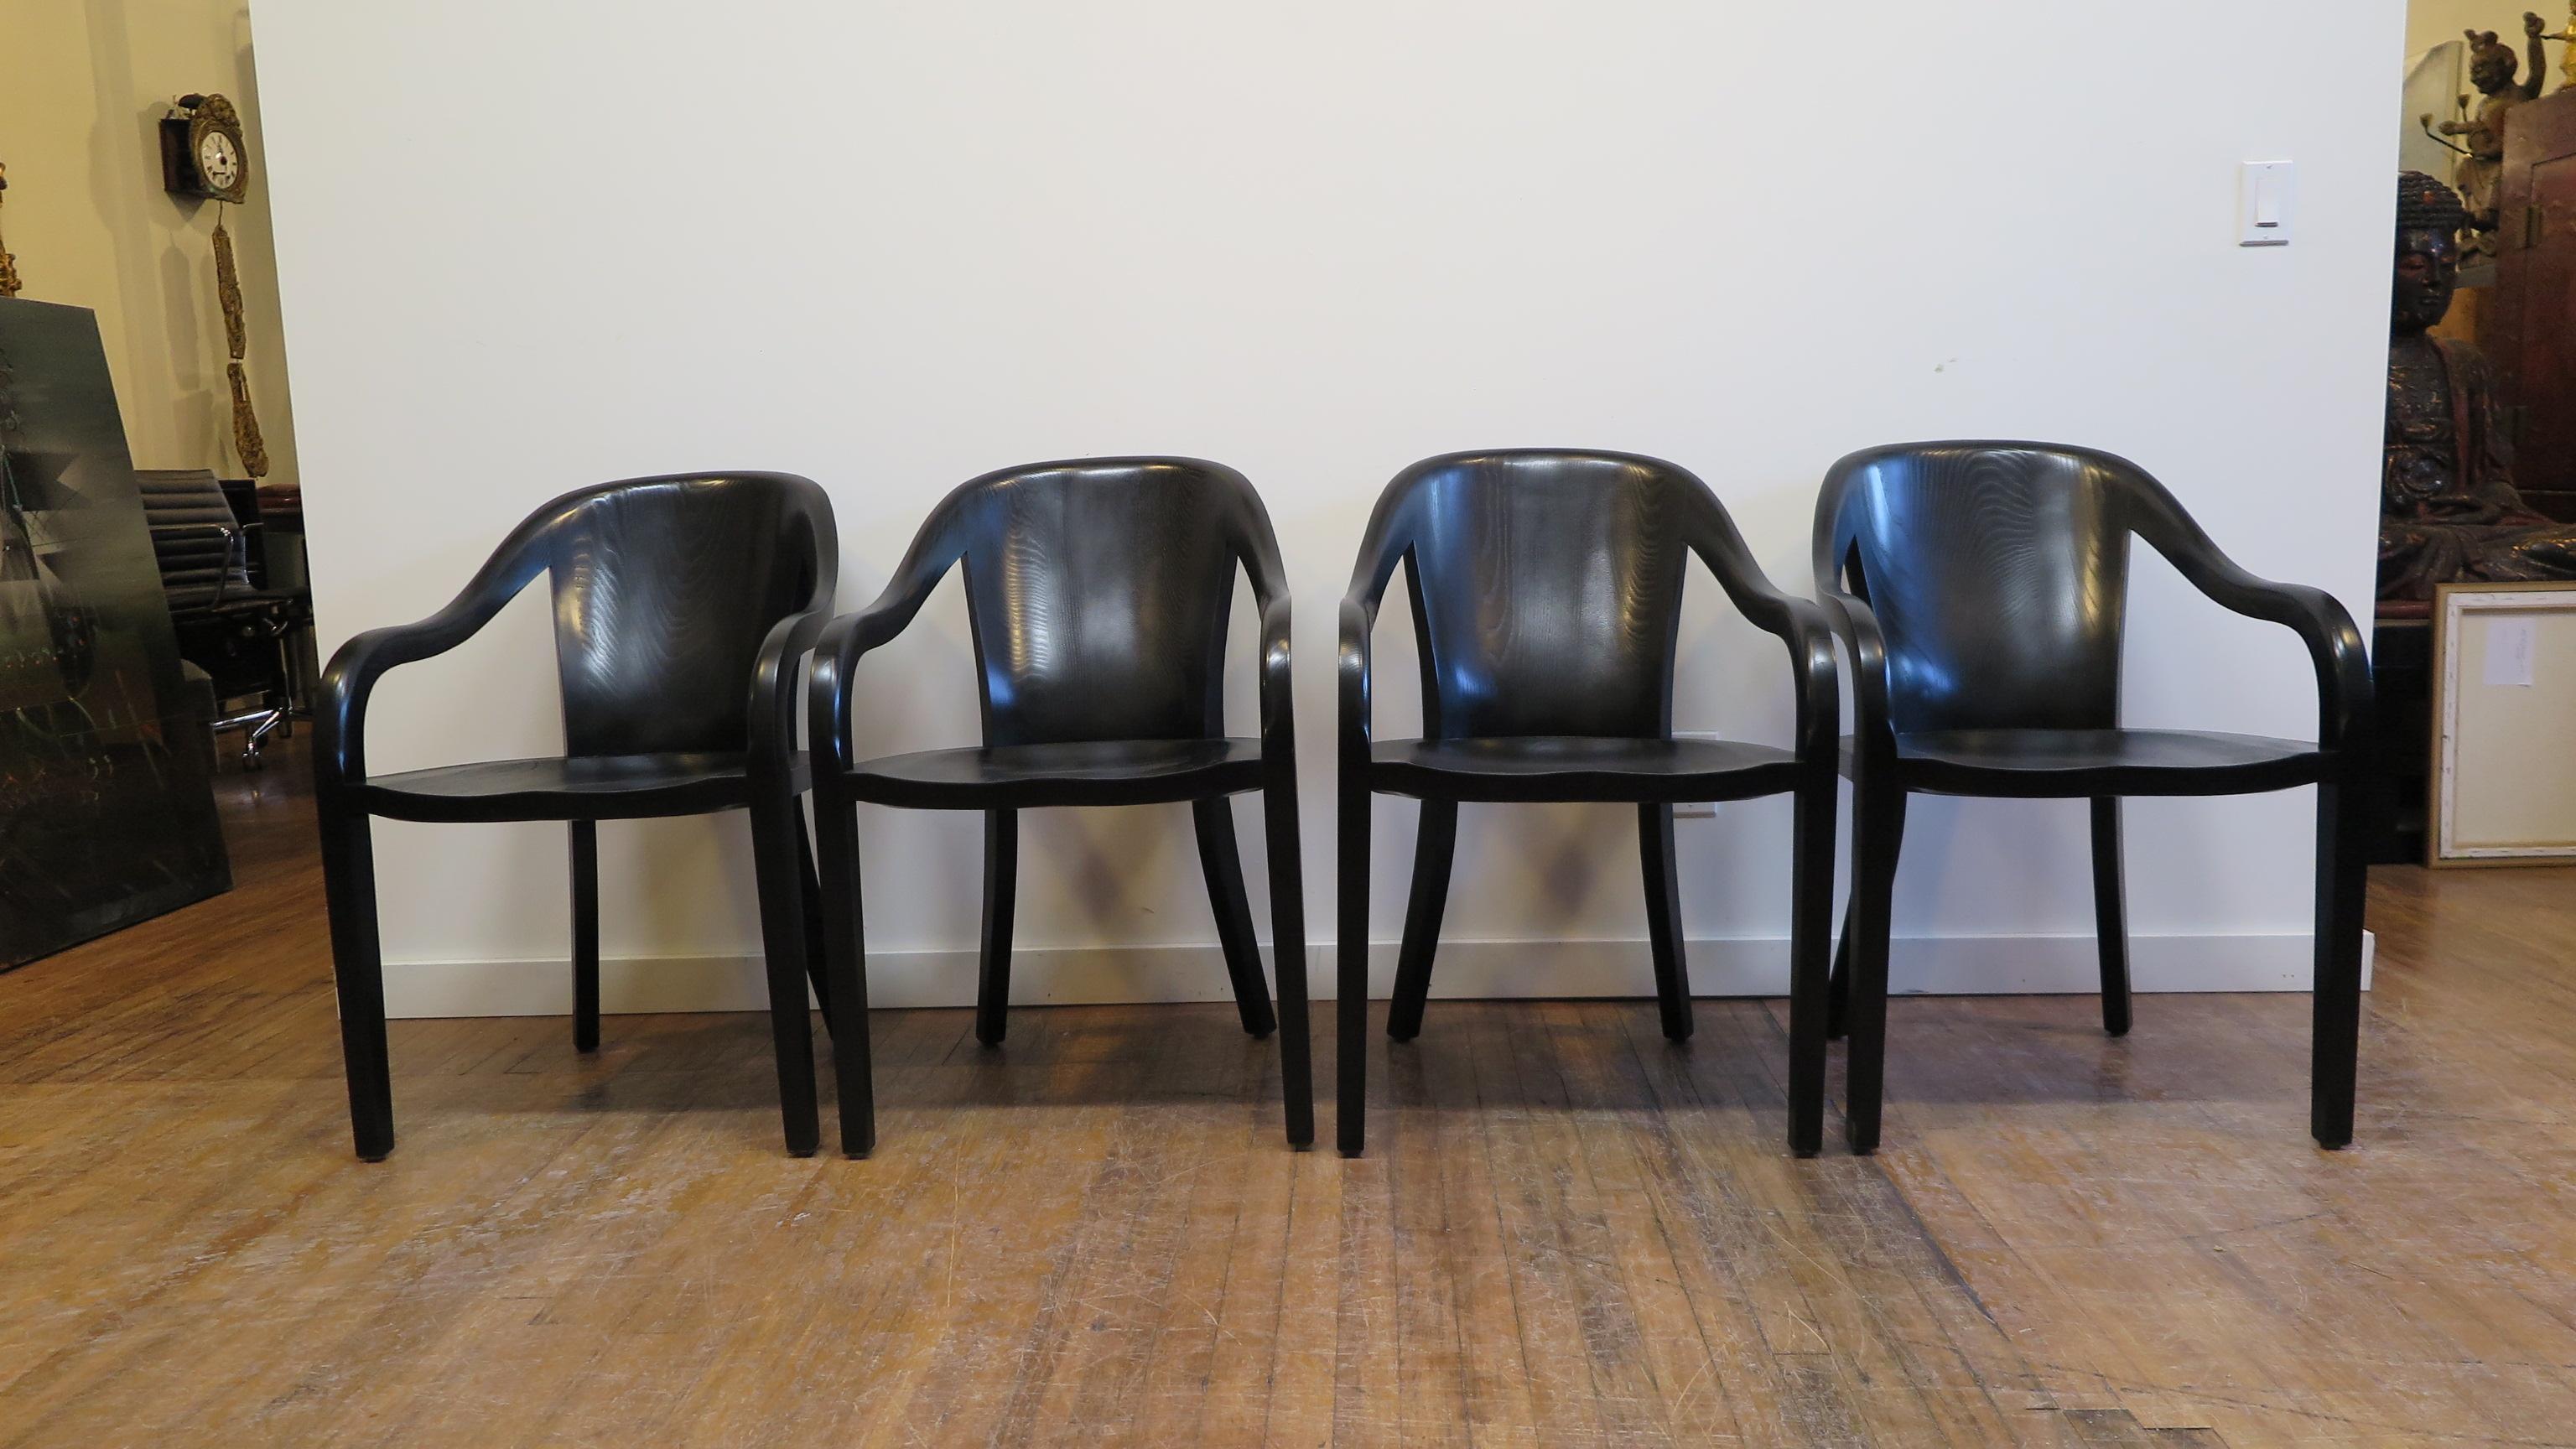 Set of four Ward Bennett University chairs in black waxed Ash. Very good condition. Ward Bennett produced these chairs through Brickell Associates in the 1970s. Each chair marked with the Brickell tag on the underside.
Designed in 1971 for the